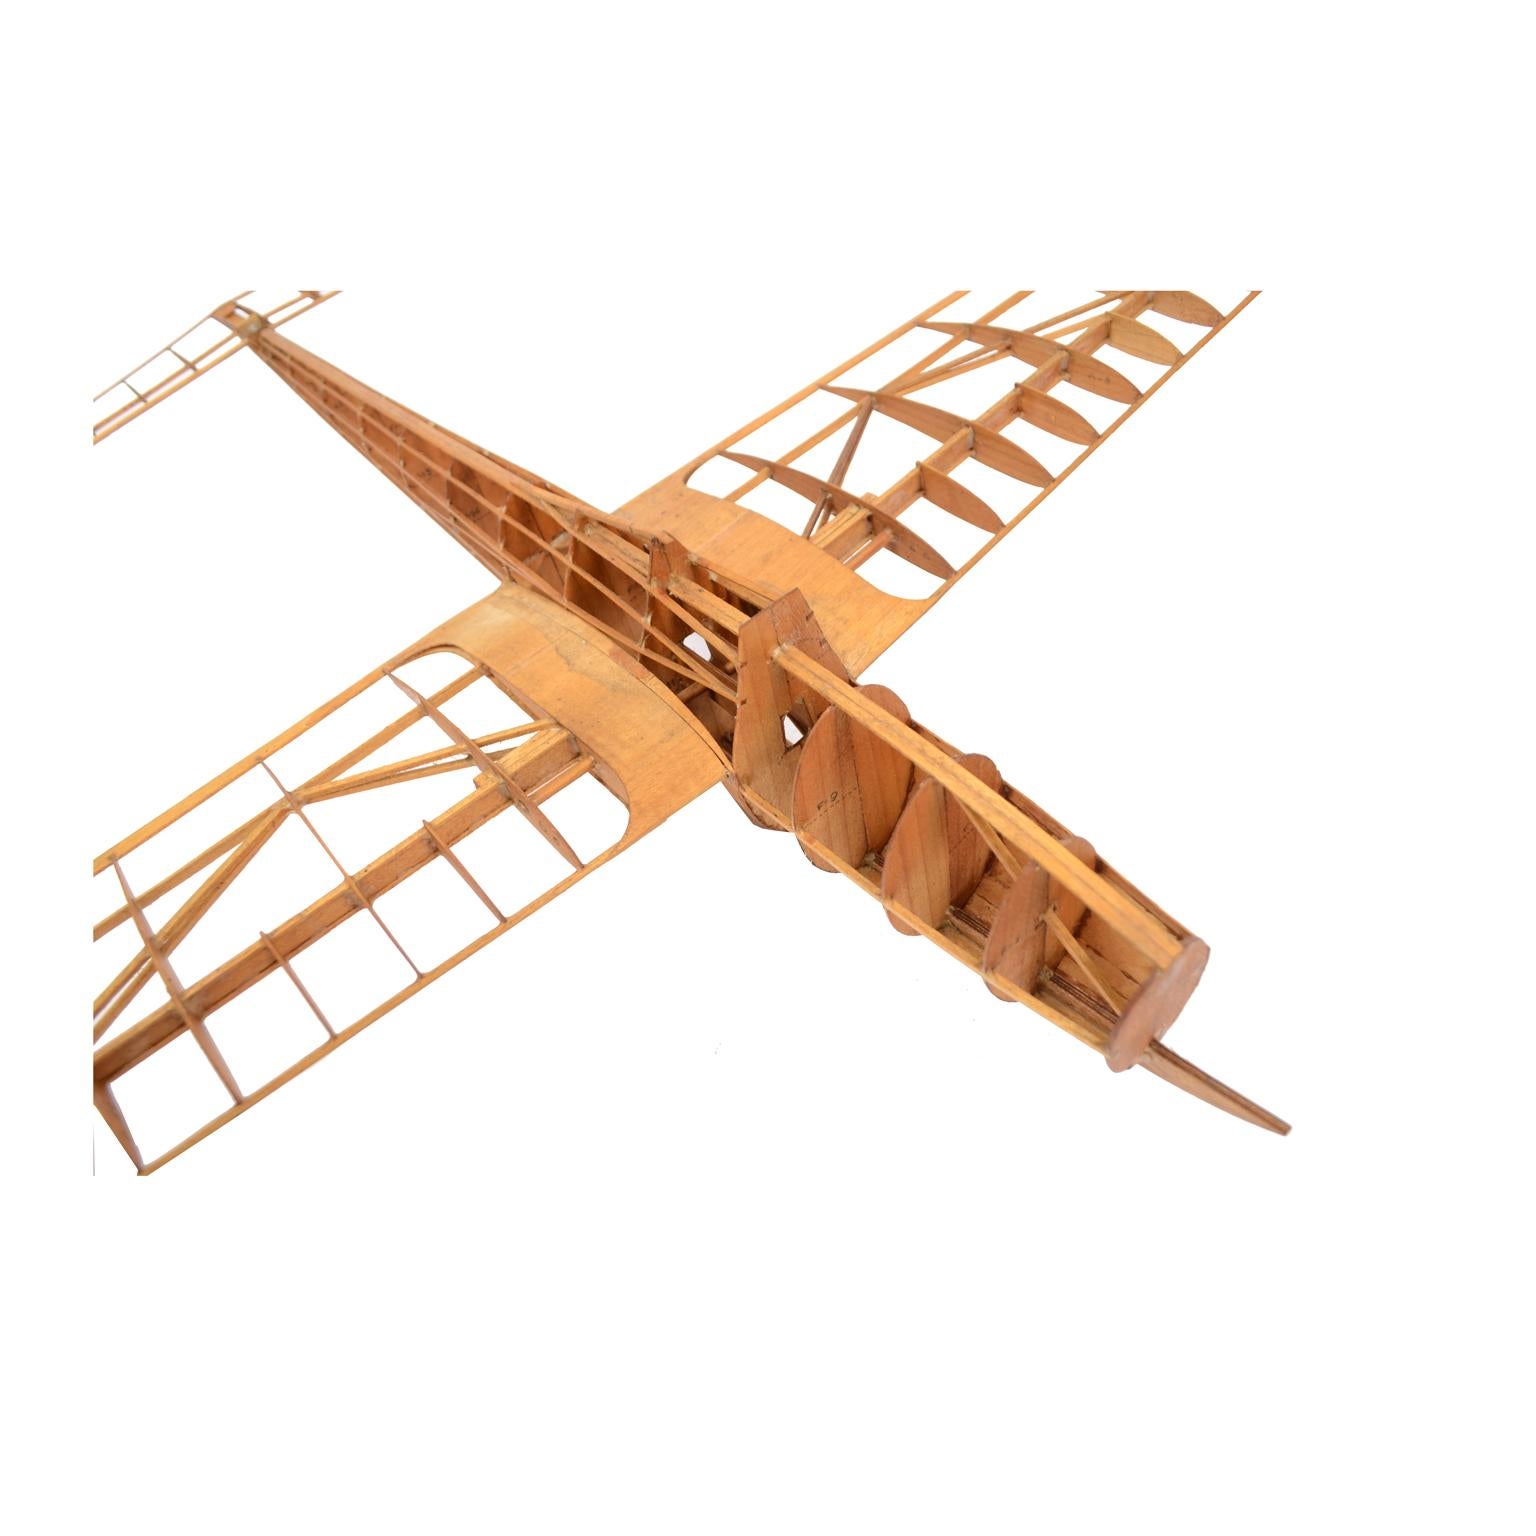 Scale Model of the Structure of a Passenger Airplane 12